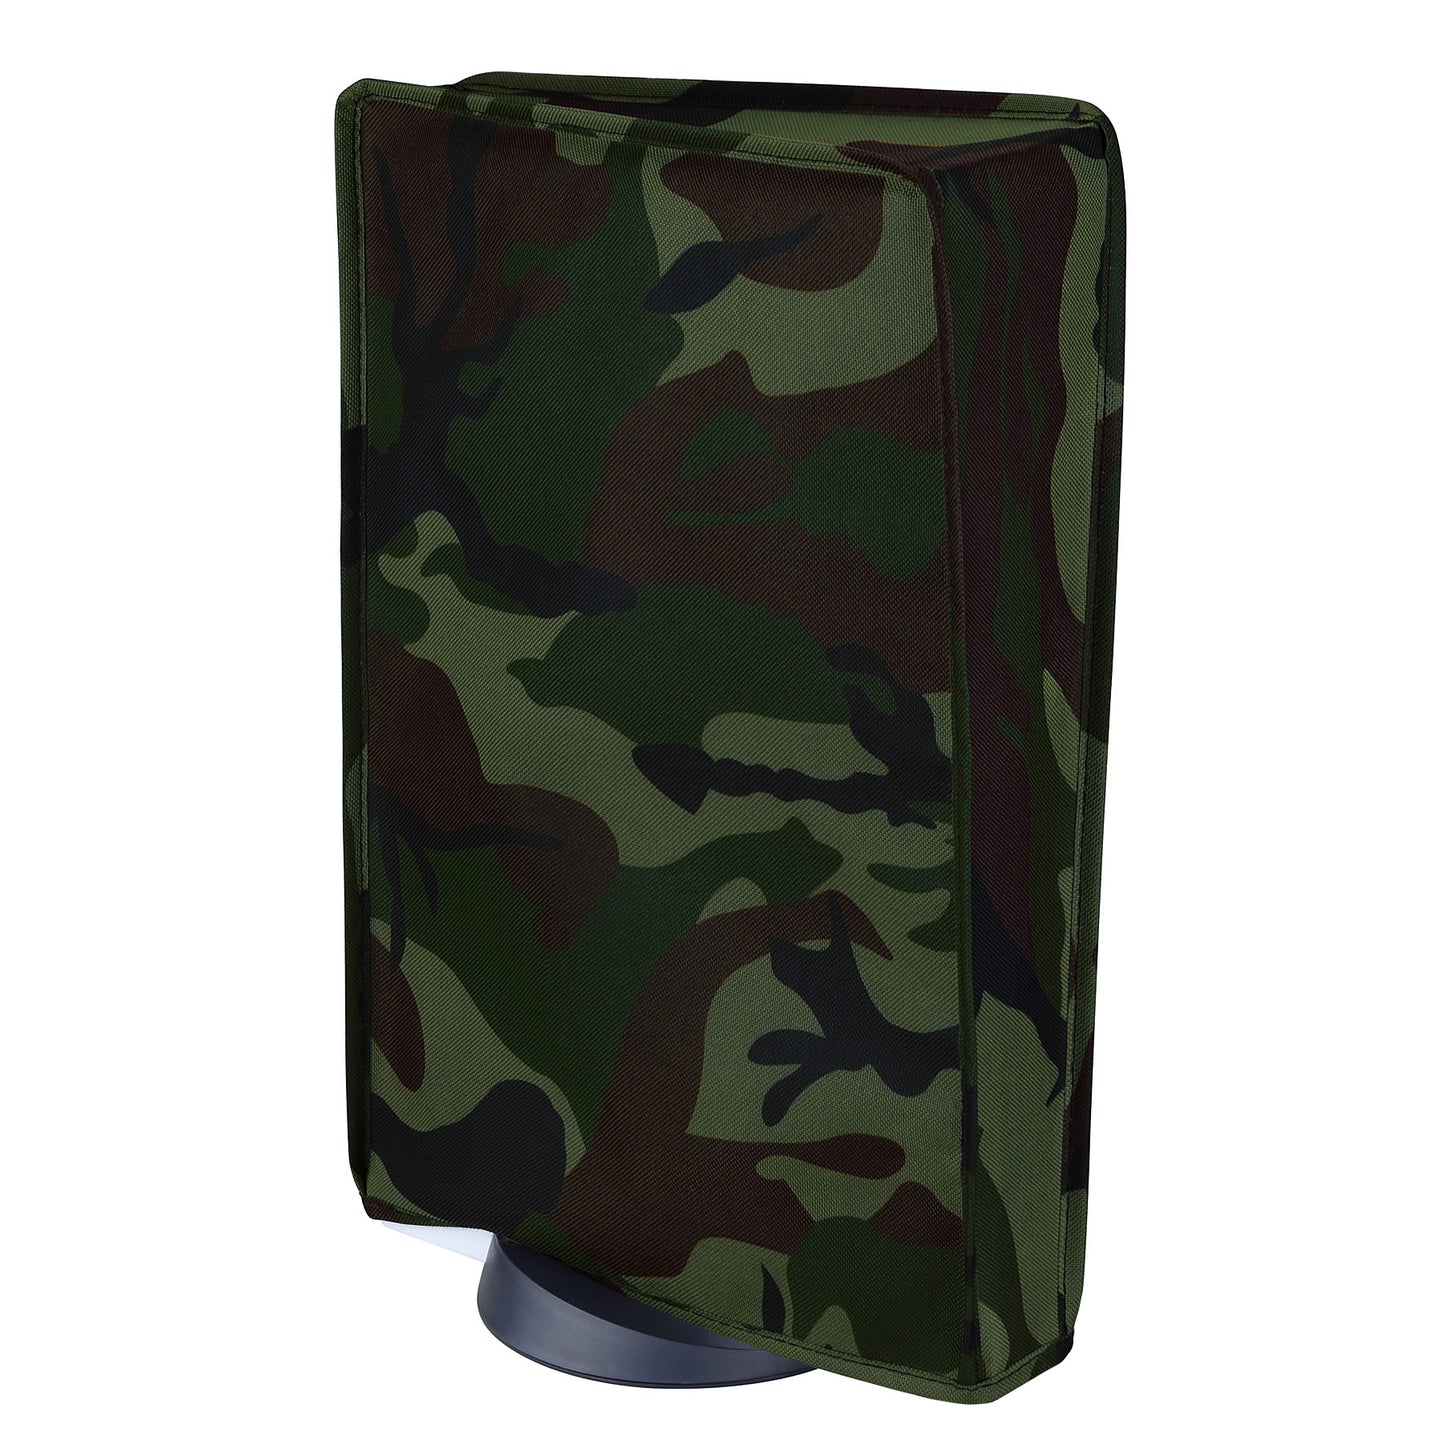 PlayVital Vertical Forest Camouflage Anti Scratch Waterproof Dust Cover for ps5 Console Digital Edition & Disc Edition - PFPJ030 PlayVital